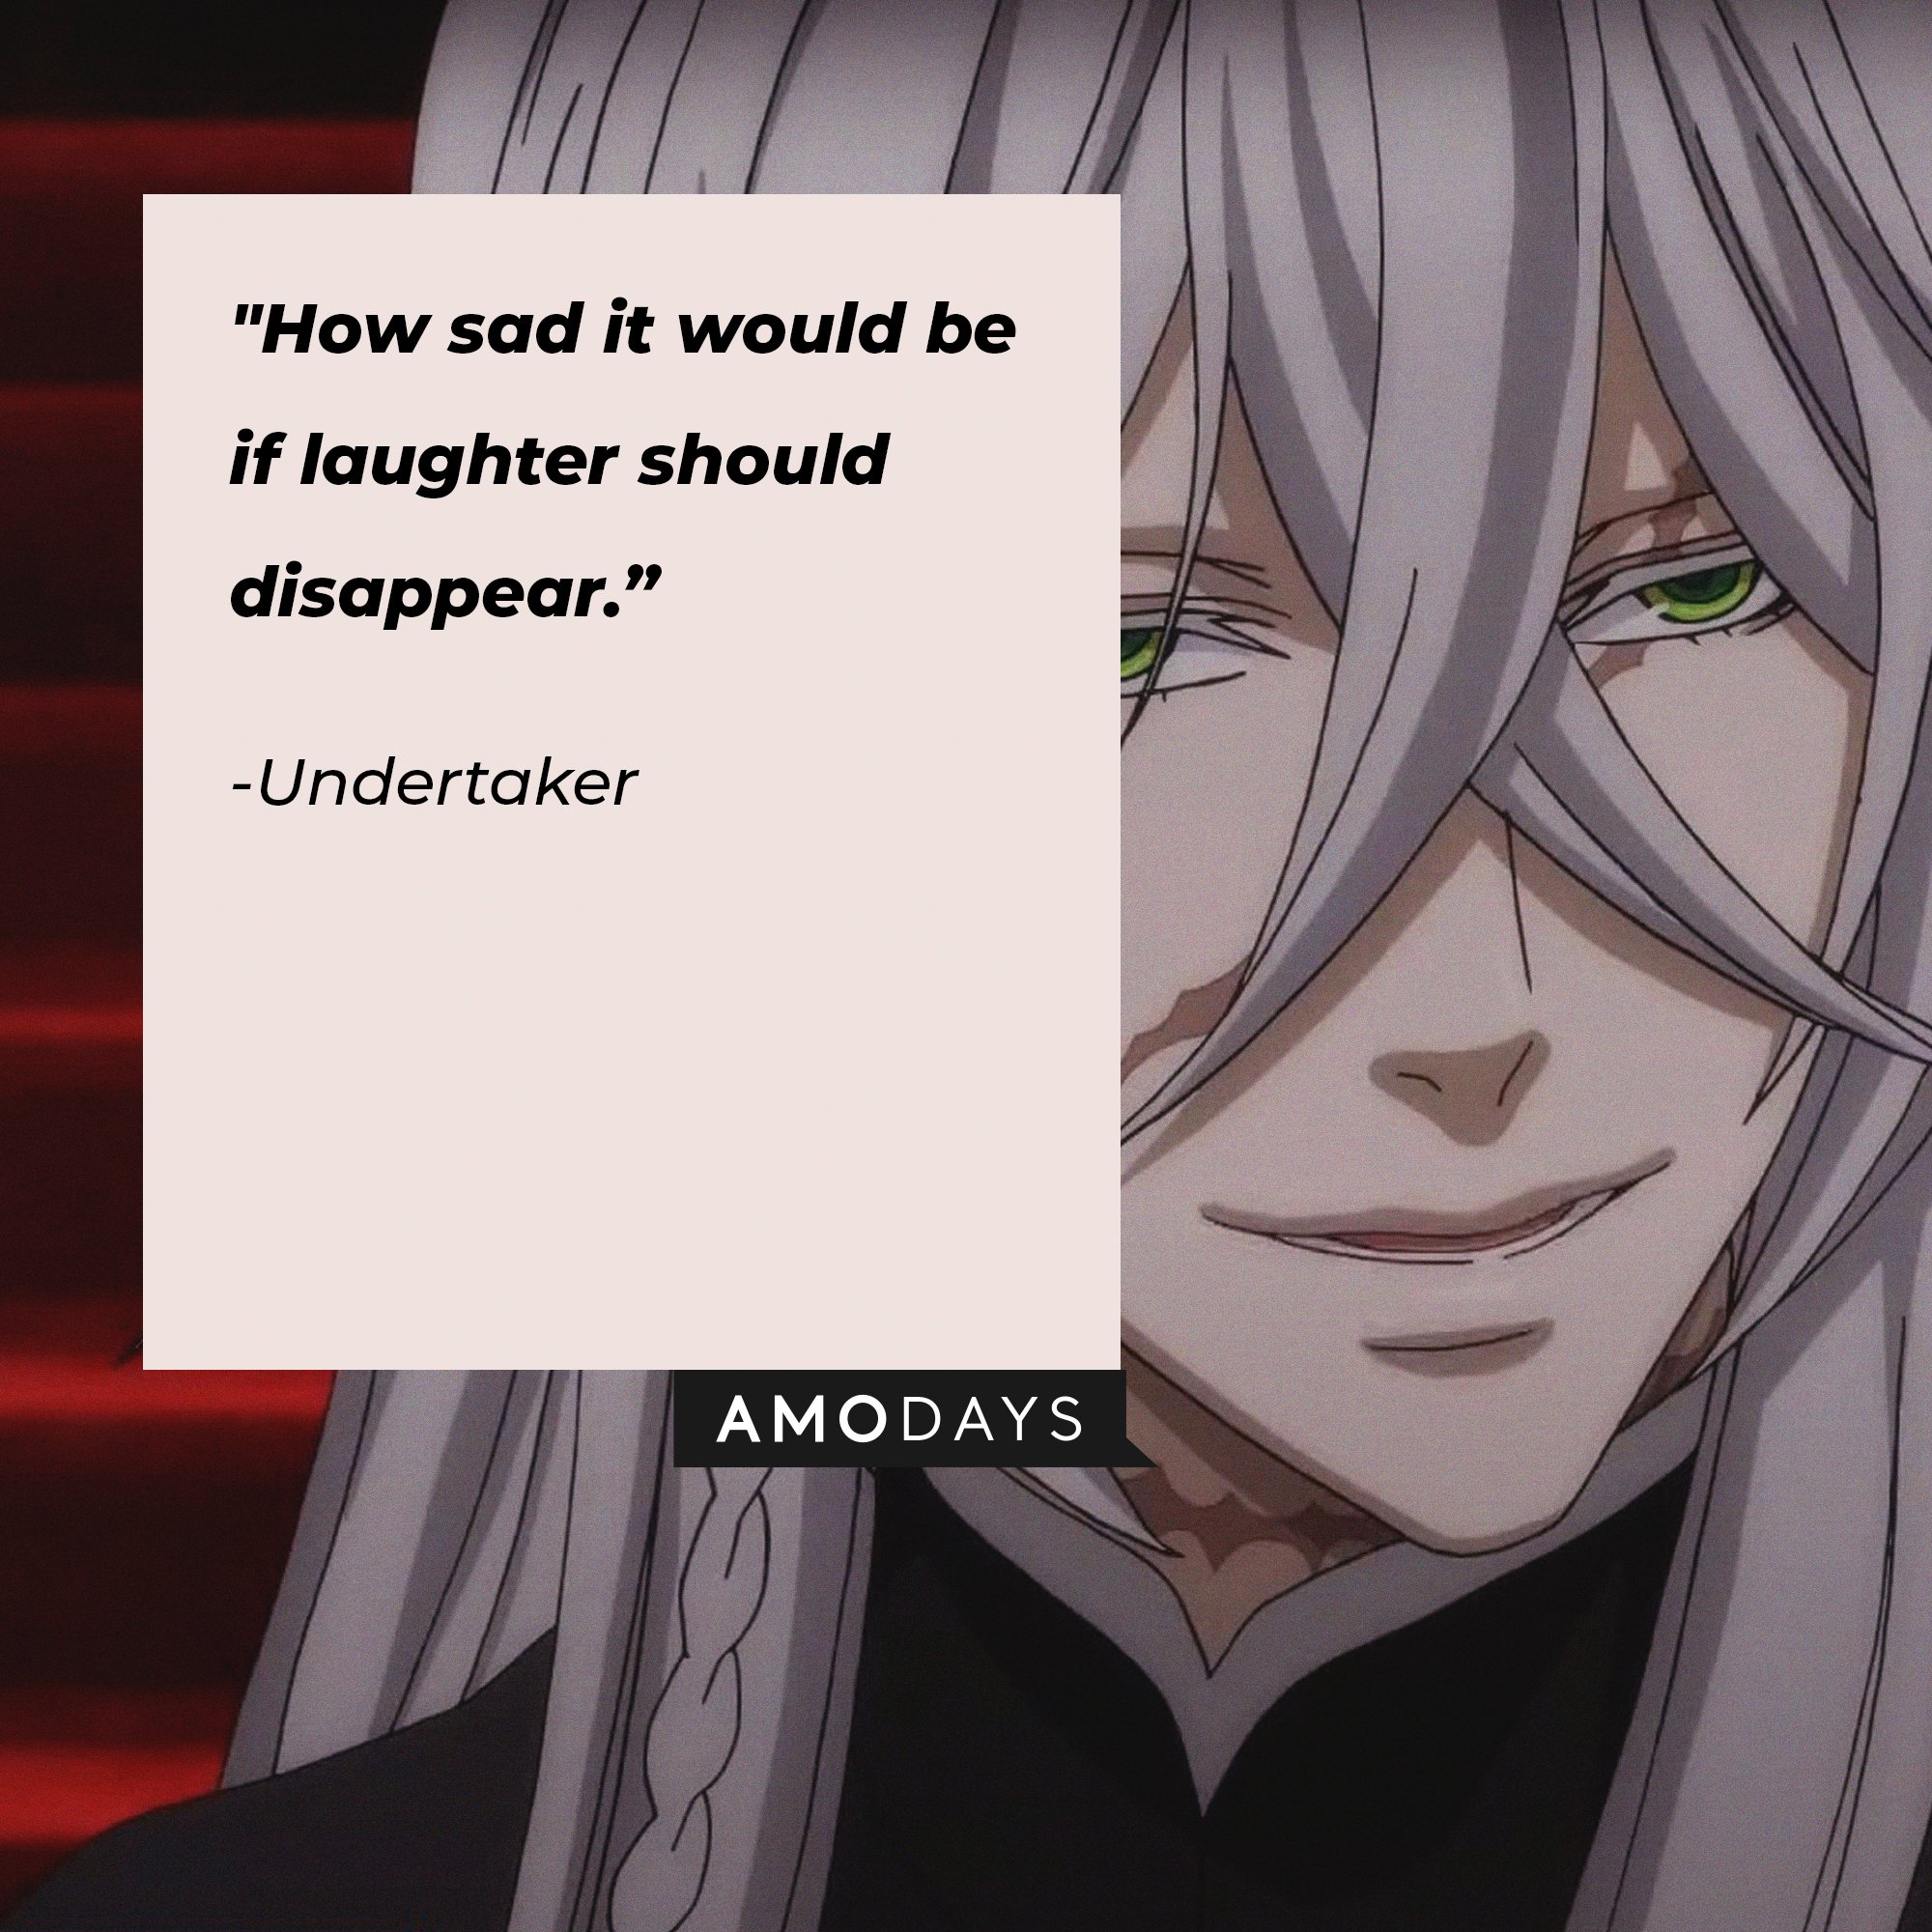 Undertaker’s quote: "How sad it would be if laughter should disappear.” | Image: AmoDays